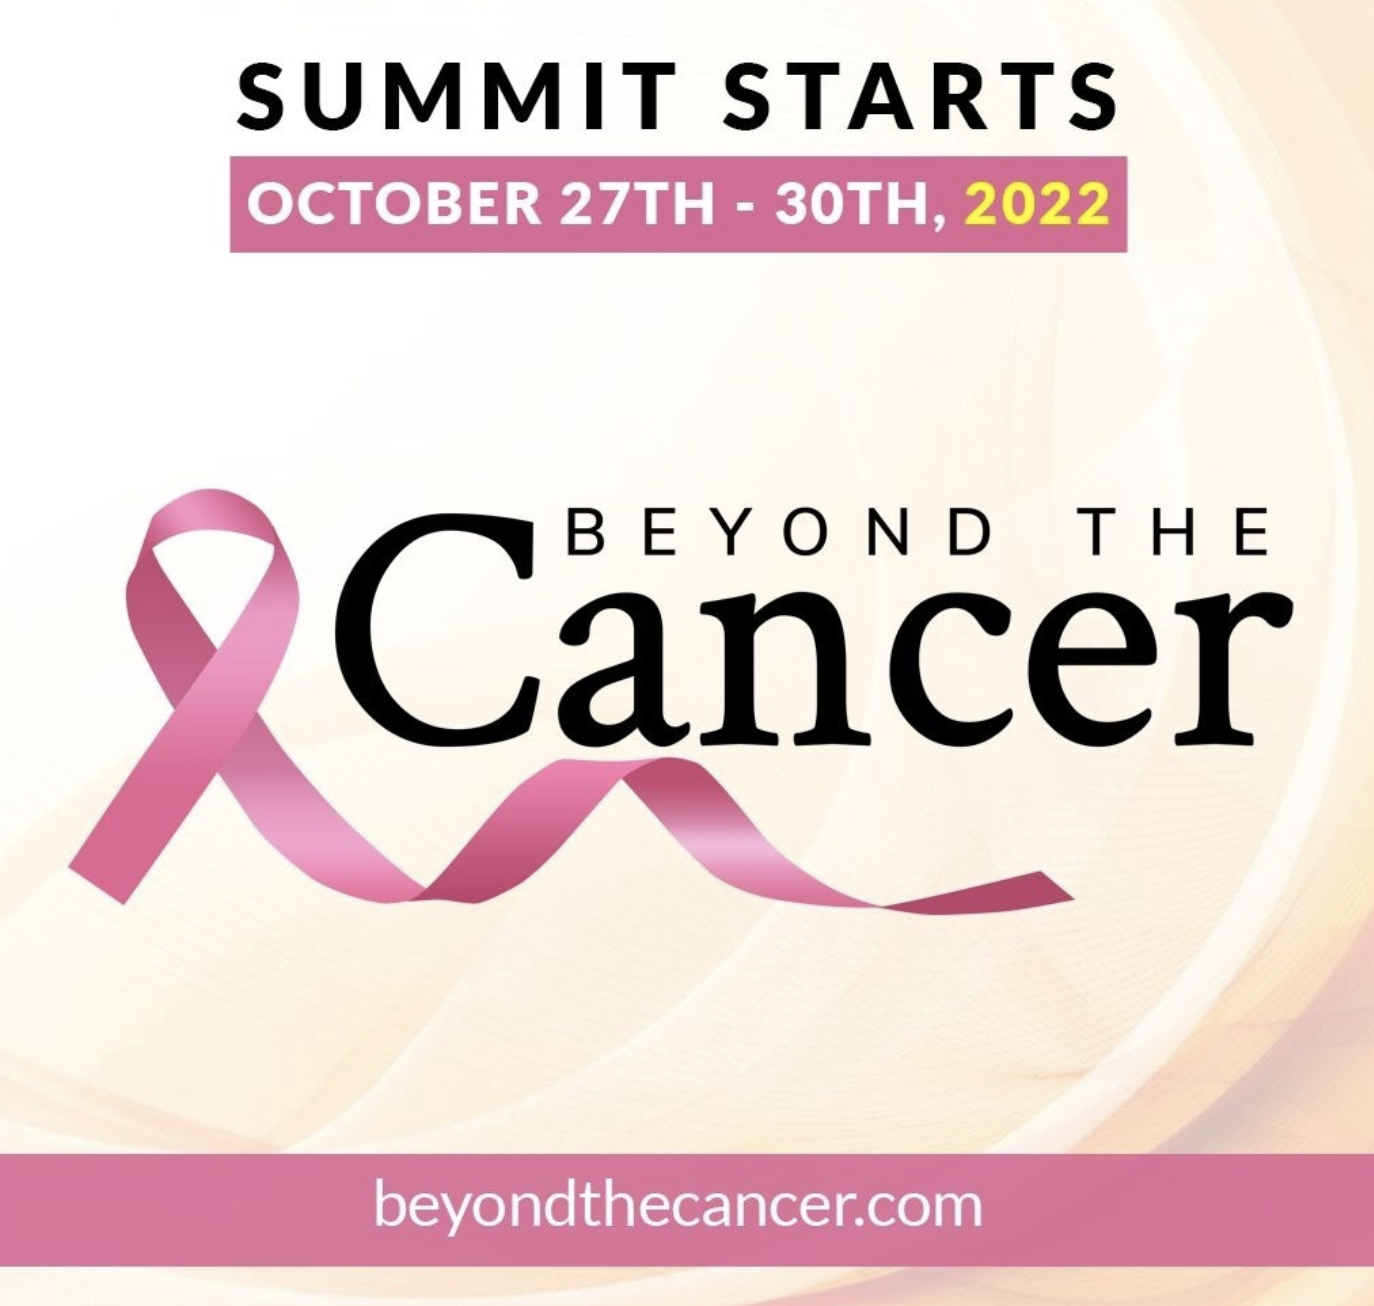 Beyond the Cancer Summit